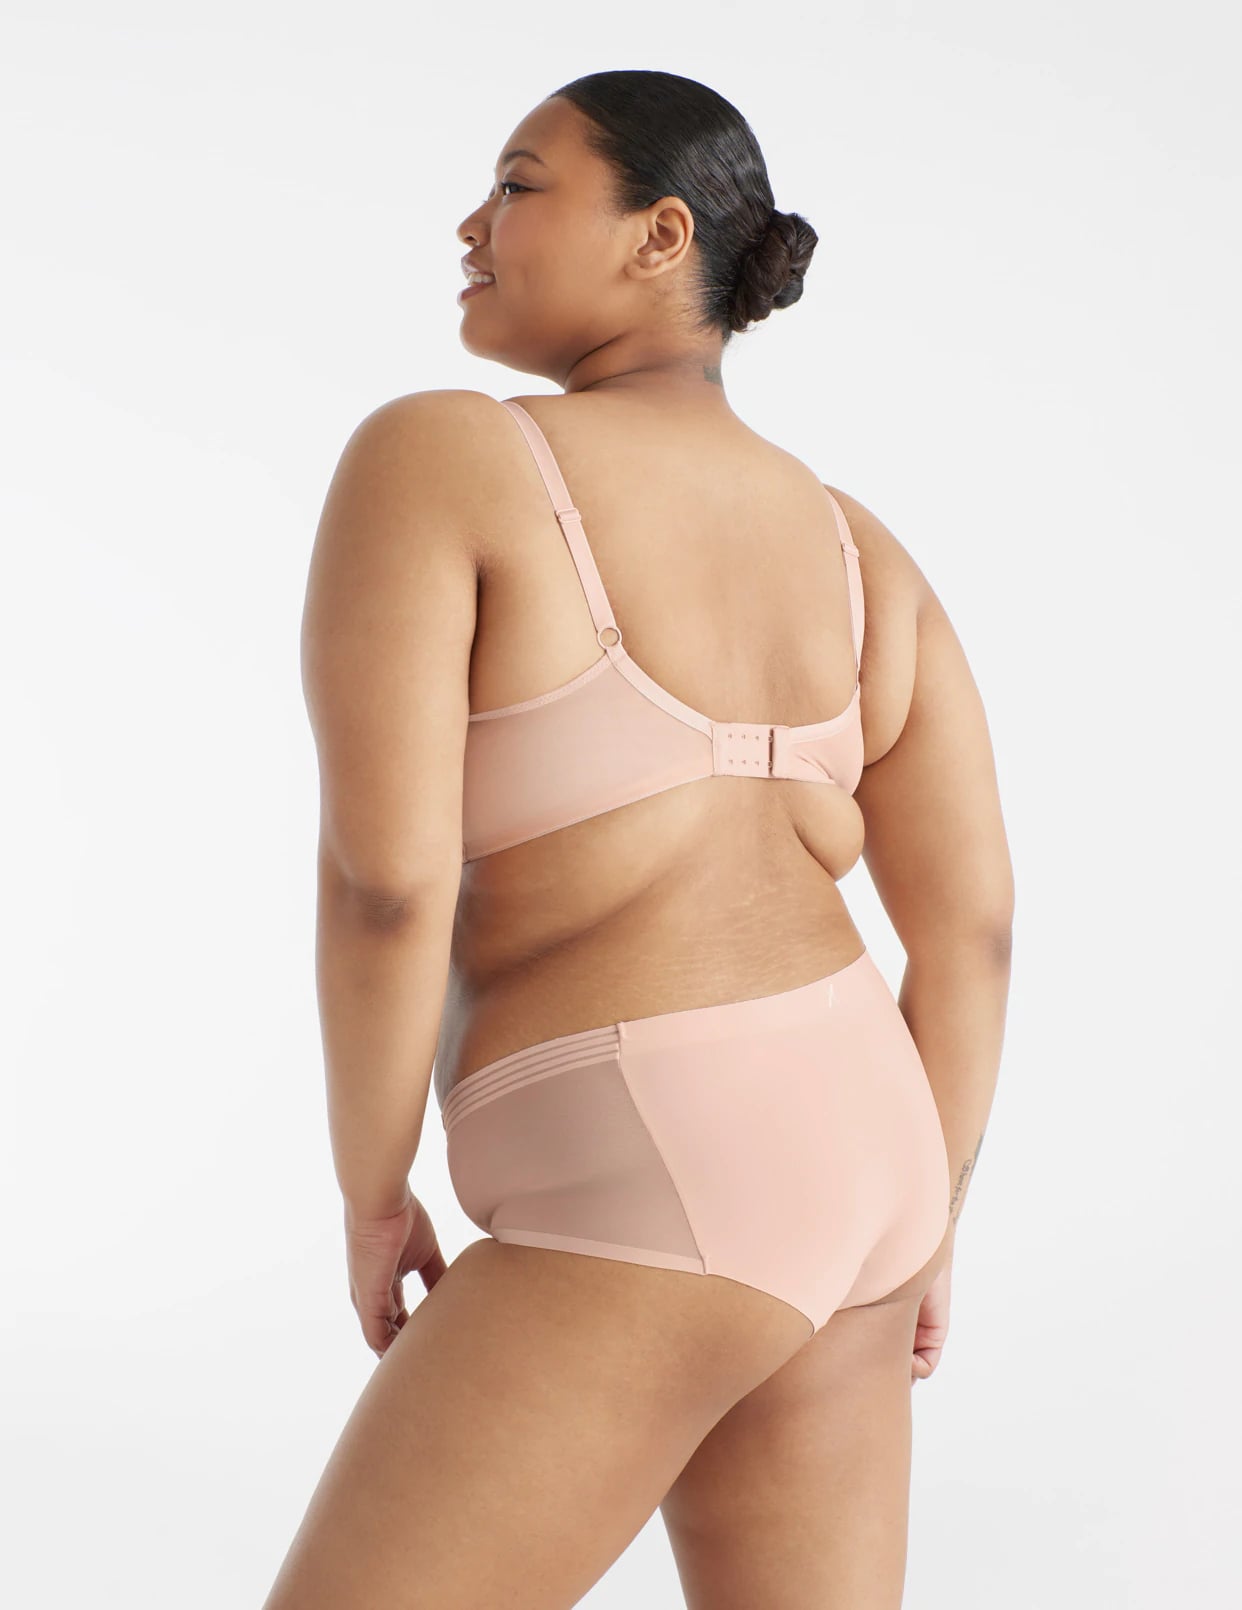 Ashley Graham's Knix Collection Is Full Of Sexy & Supportive Undergarments